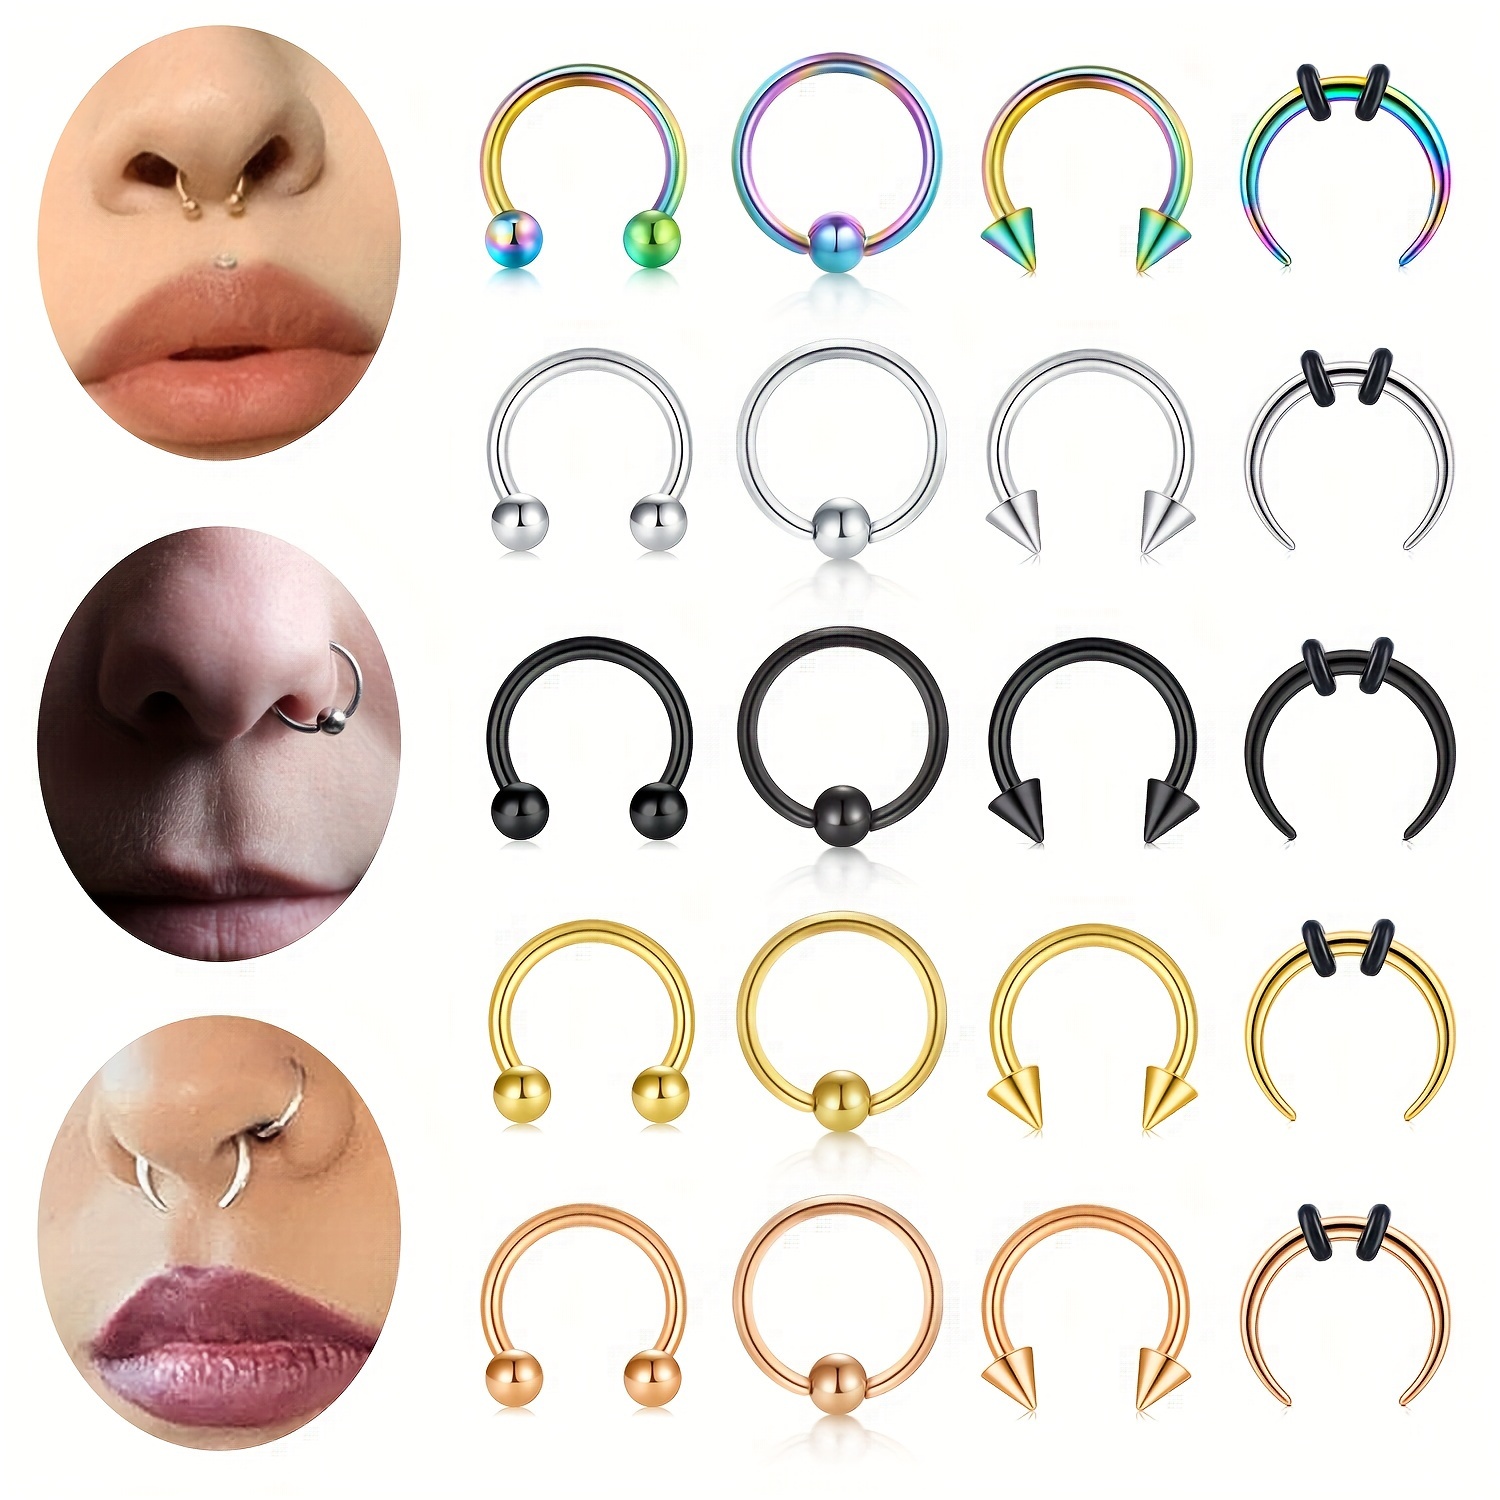 

4pcs/set 16g Body Piercing Jewelry, Nose Ring, Septum Ring, Horseshoe Ring, U-shaped Ring, Stainless Steel Minimalist Body Piercing Jewelry For Daily Wear